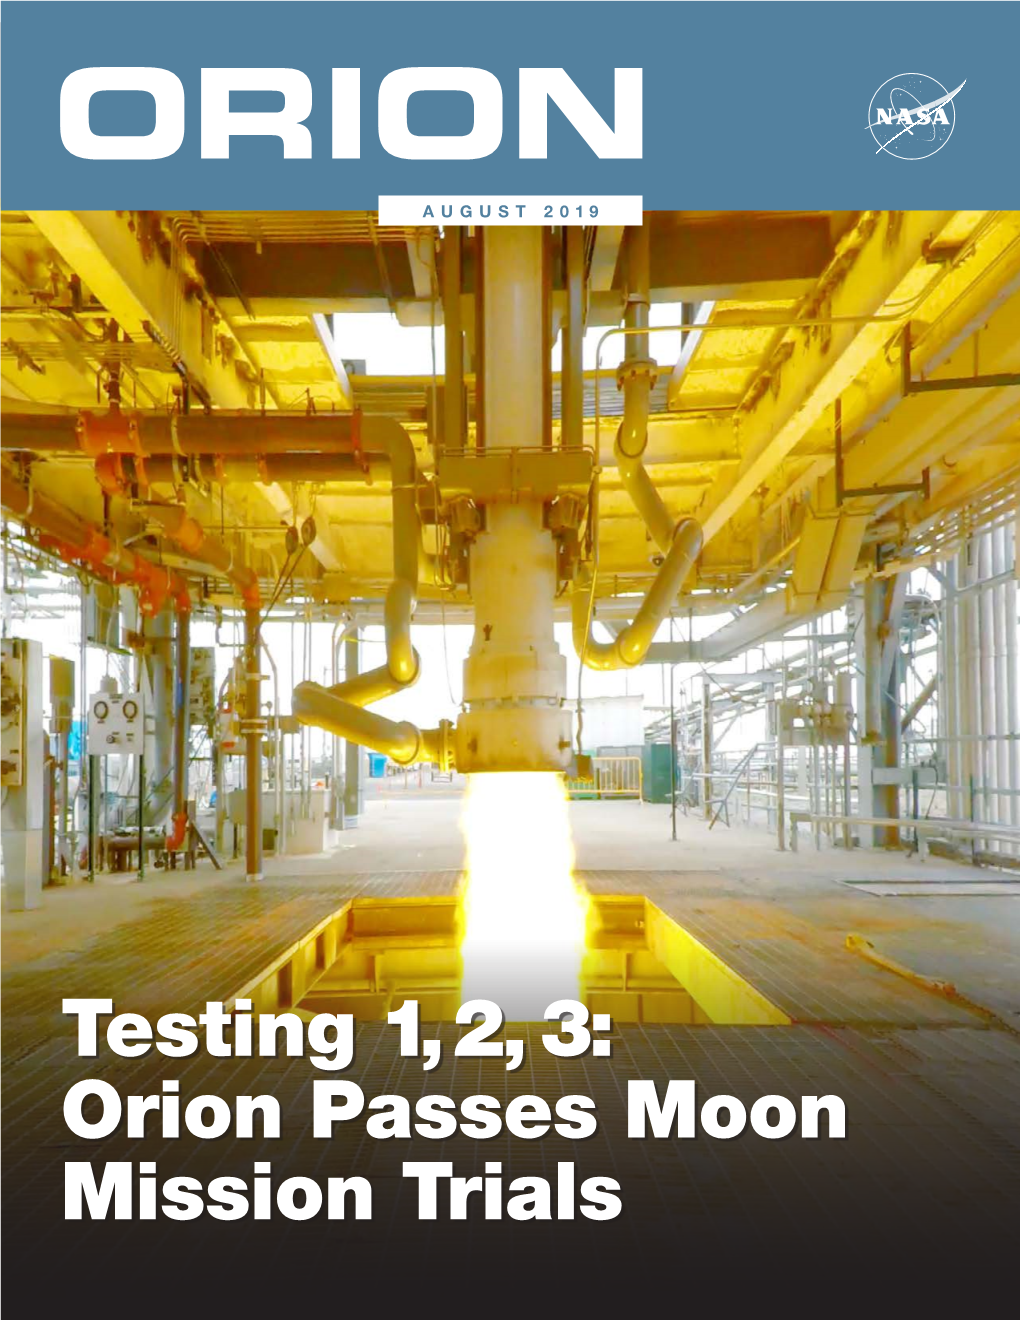 Testing 1, 2, 3: Orion Passes Moon Mission Trials ORION’S SERVICE MODULE COMPLETES CRITICAL PROPULSION TEST